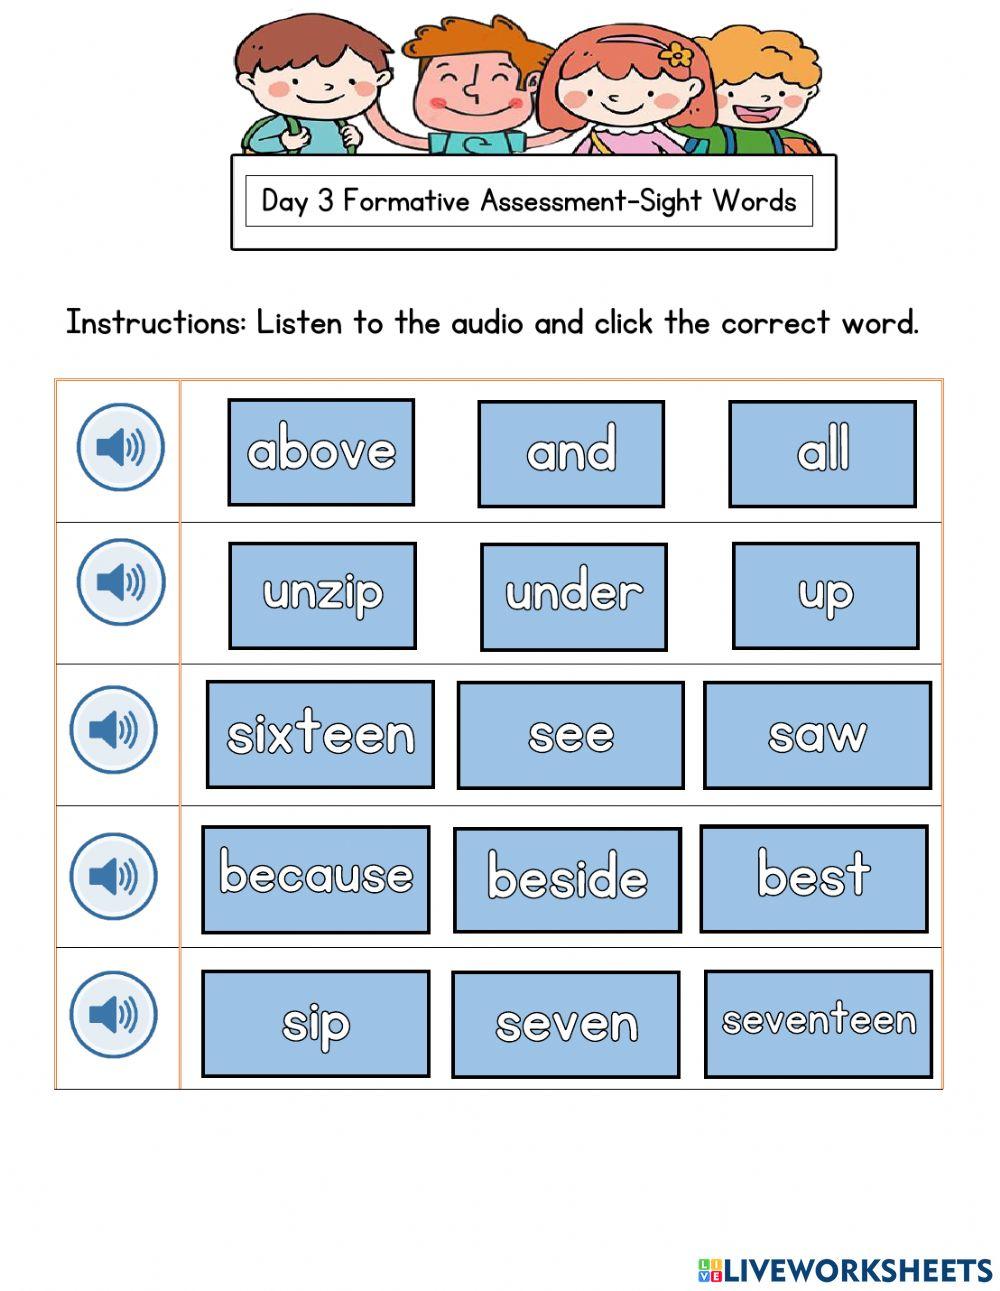 Day 3 Formative Assessment - Sight Words